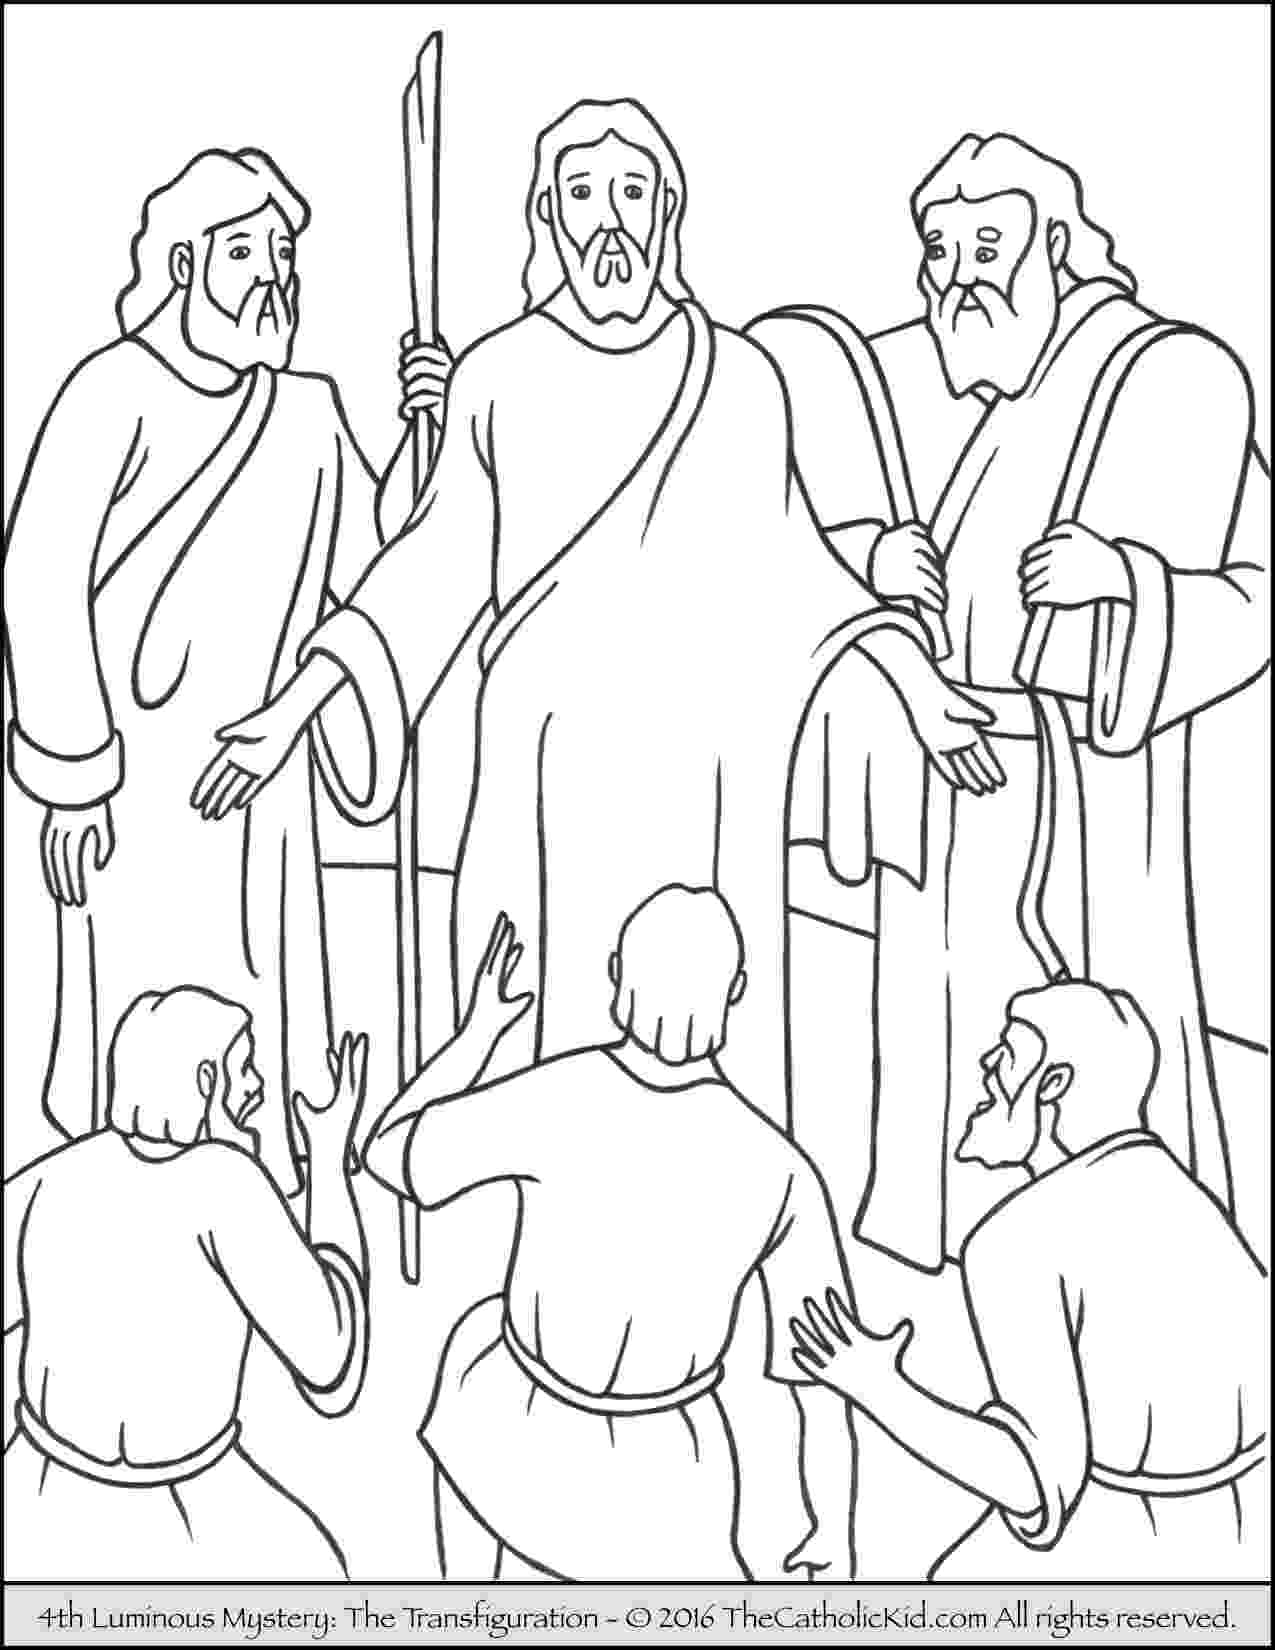 the transfiguration of jesus coloring page luminous mysteries rosary coloring pages the catholic kid coloring jesus of transfiguration page the 